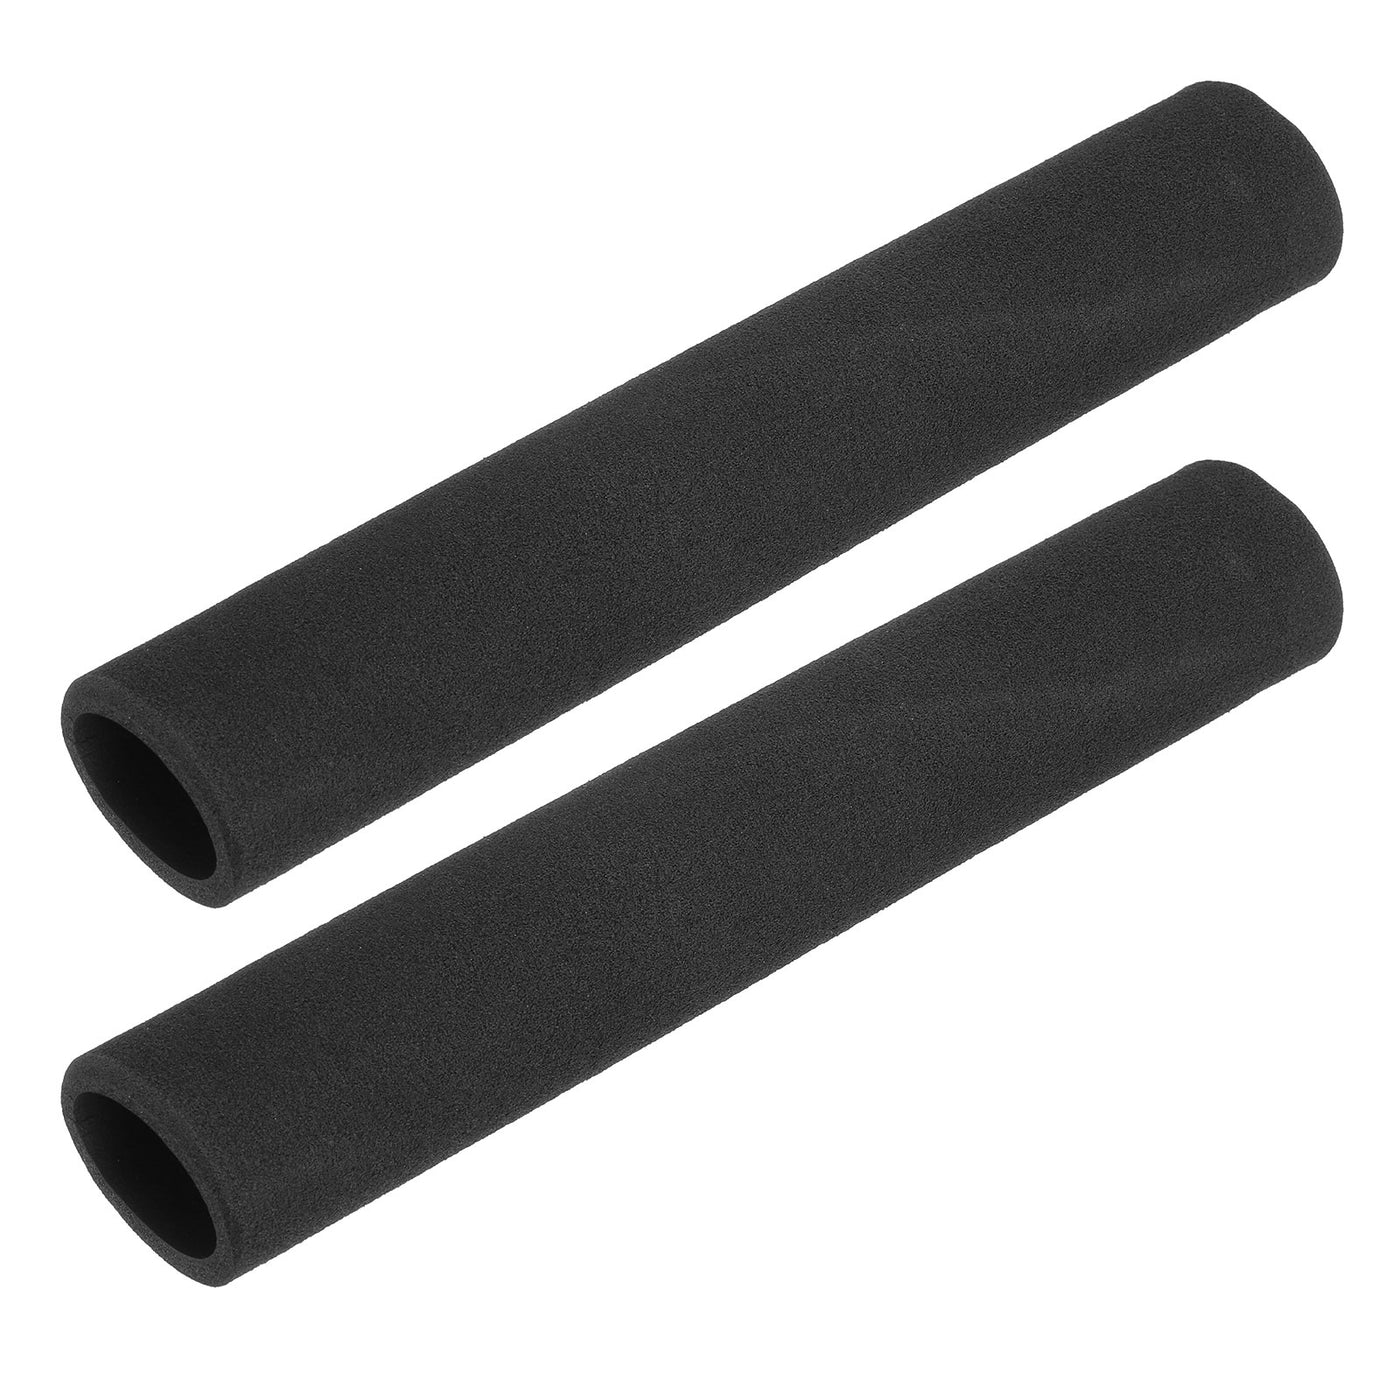 uxcell Uxcell Pipe Insulation Tube Foam Tubing for Handle Grip Support 27mm ID 37mm OD 390mm Heat Preservation Black 2pcs